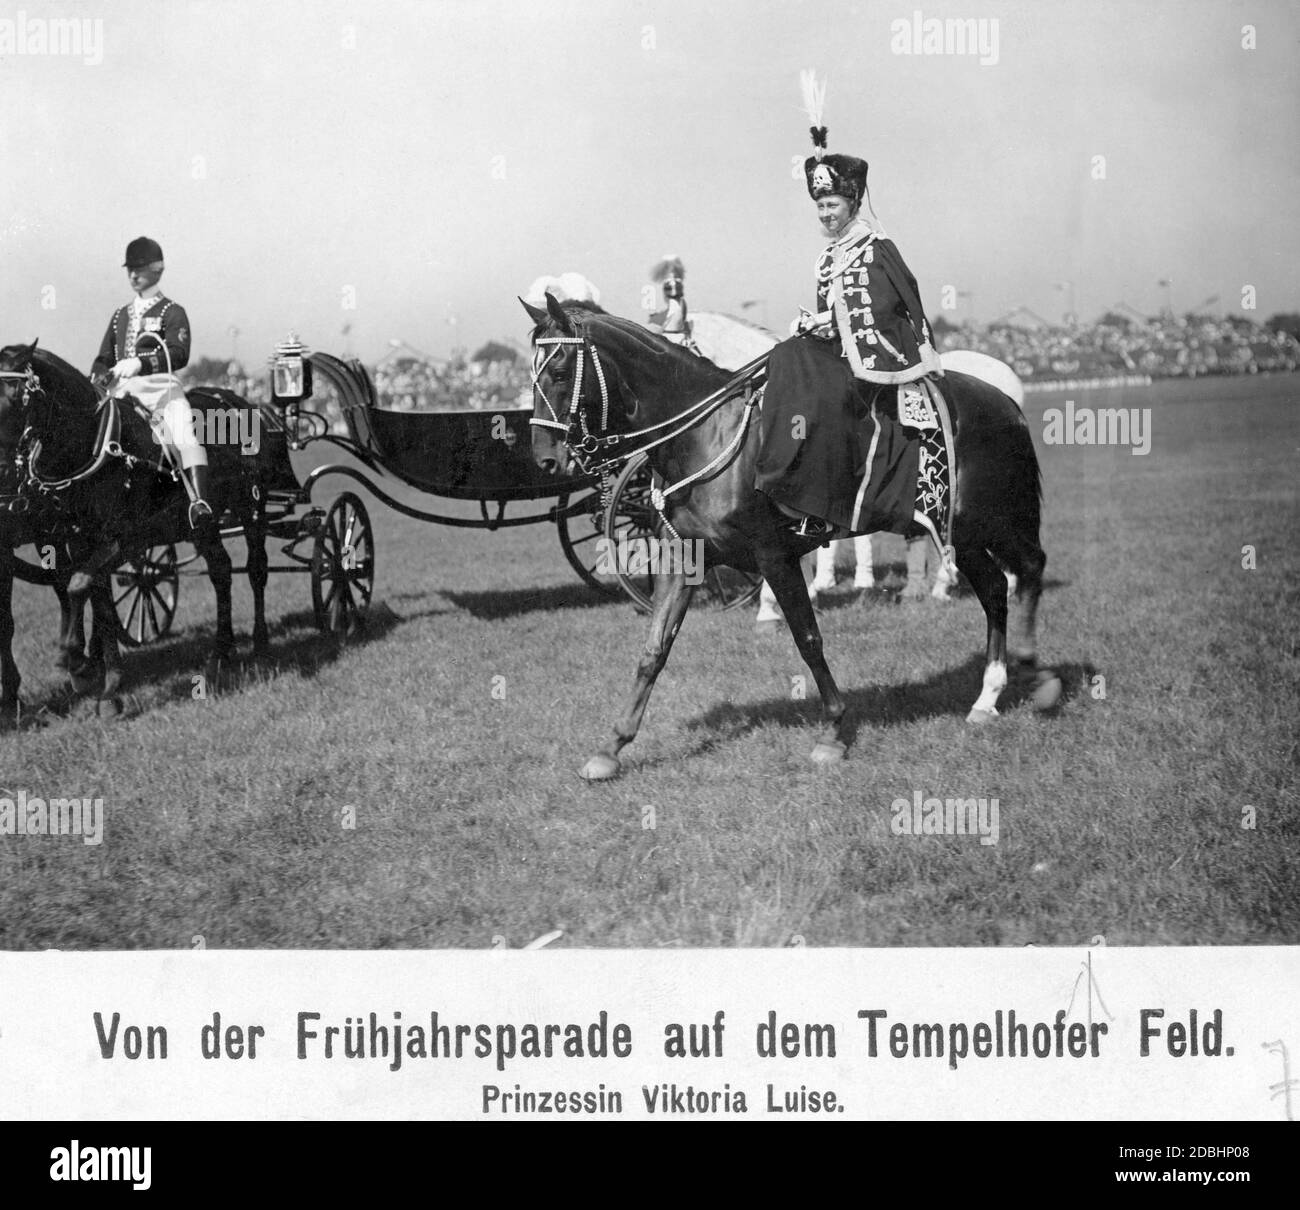 Princess Victoria Louise of Prussia (in the uniform of the 2. Leib-Husaren-Regiments „Koenigin Viktoria von Preussen“ Nr. 2) took part in the spring parade on the Tempelhofer Feld in Berlin in 1911. In the background there are tribunes with audience. Stock Photo